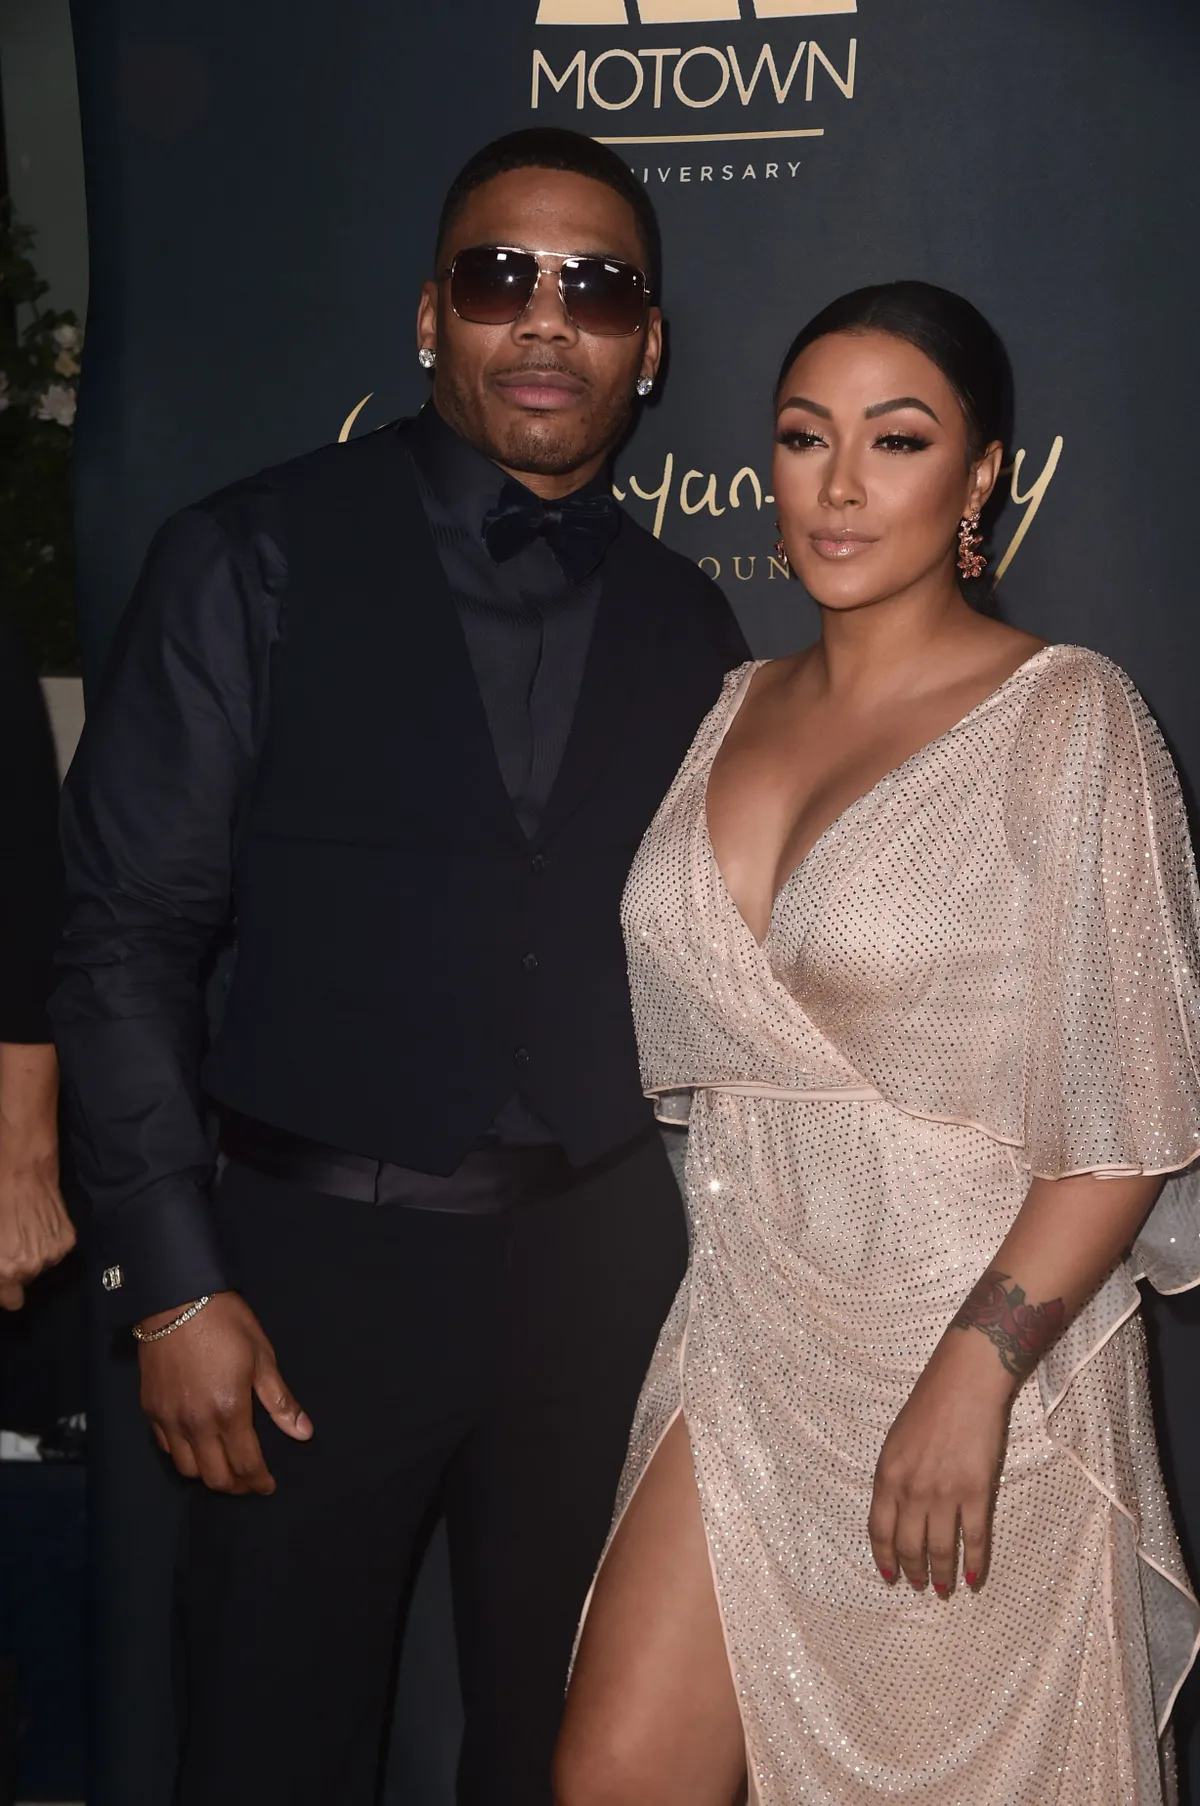 Nelly and Shantel Jackson at The Ryan Gordy Foundation's celebration of 60 Years Of Mowtown on November 11, 2019.  | Photo: Getty Images